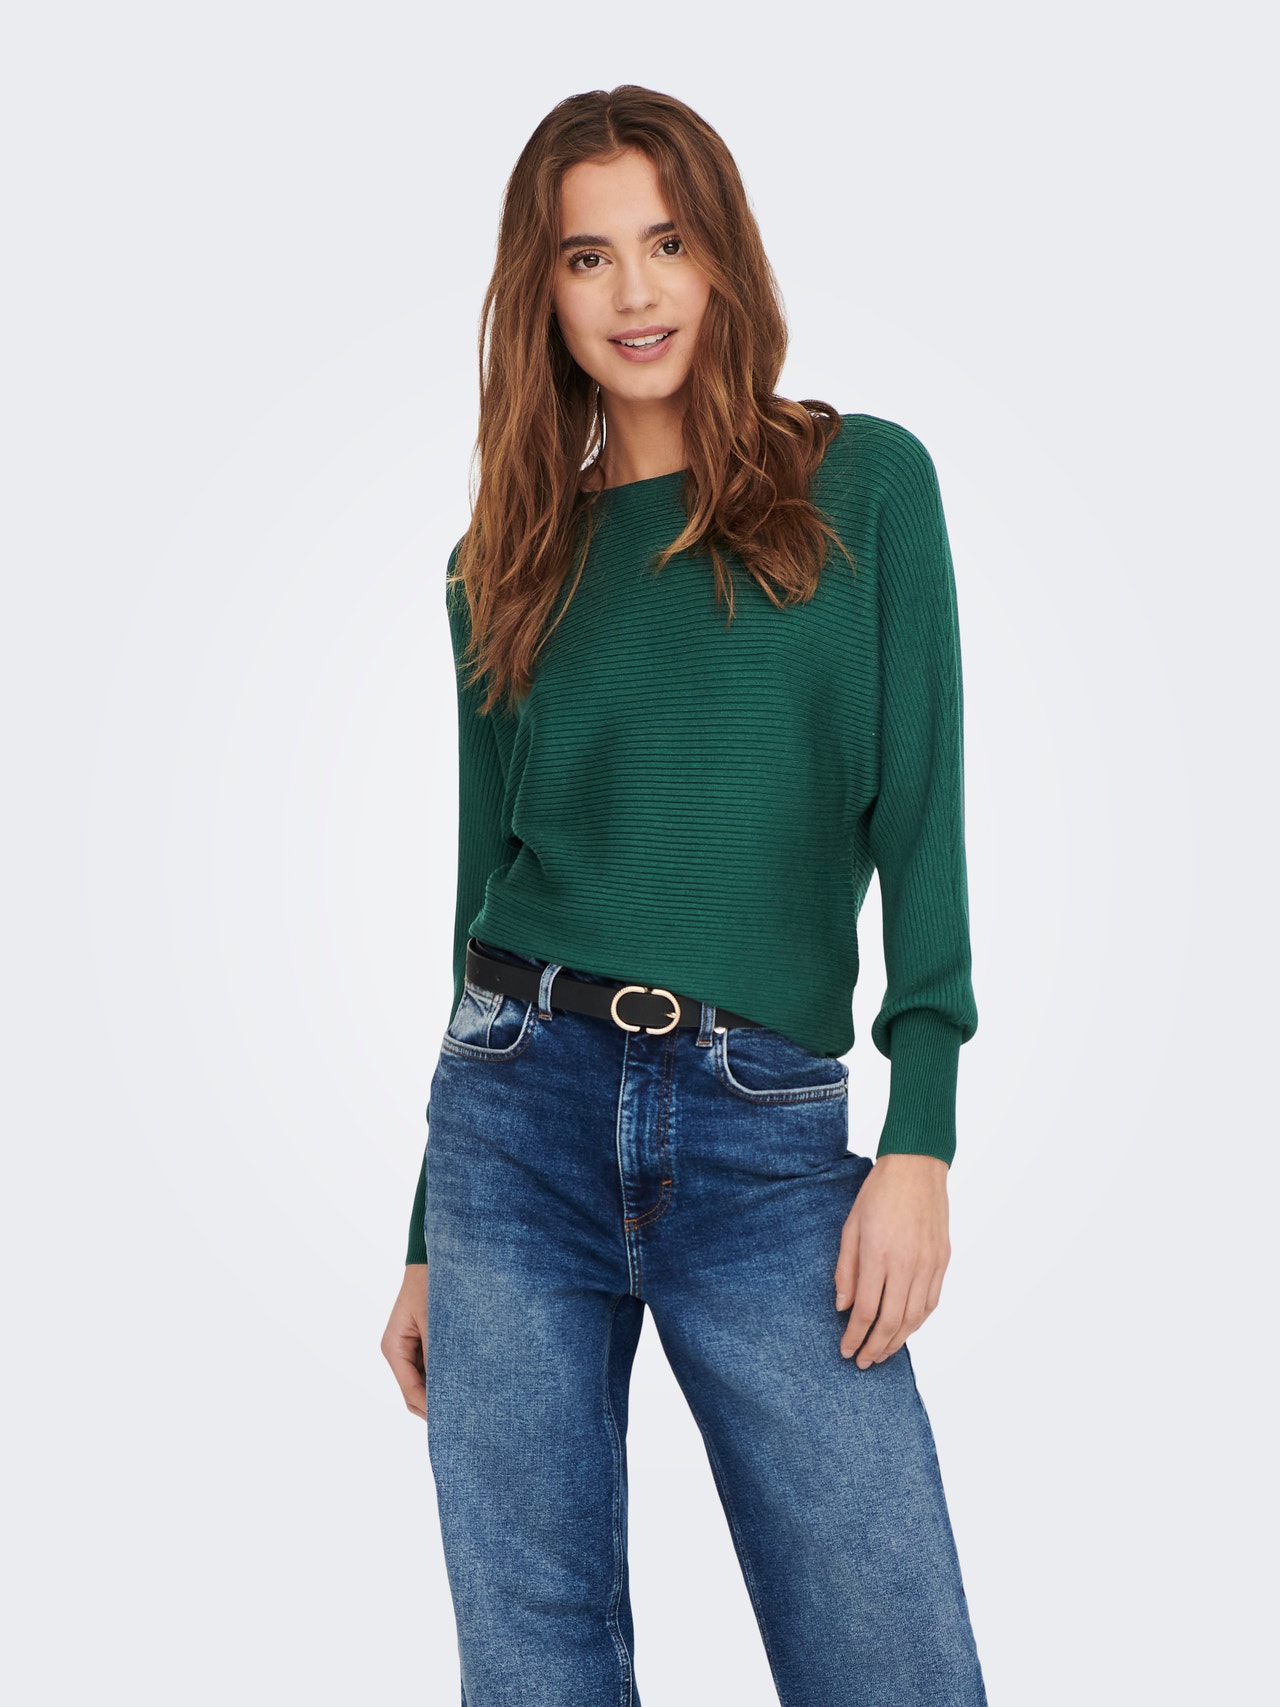 ONLY Short Knitted Pullover -Ponderosa Pine - 15226298